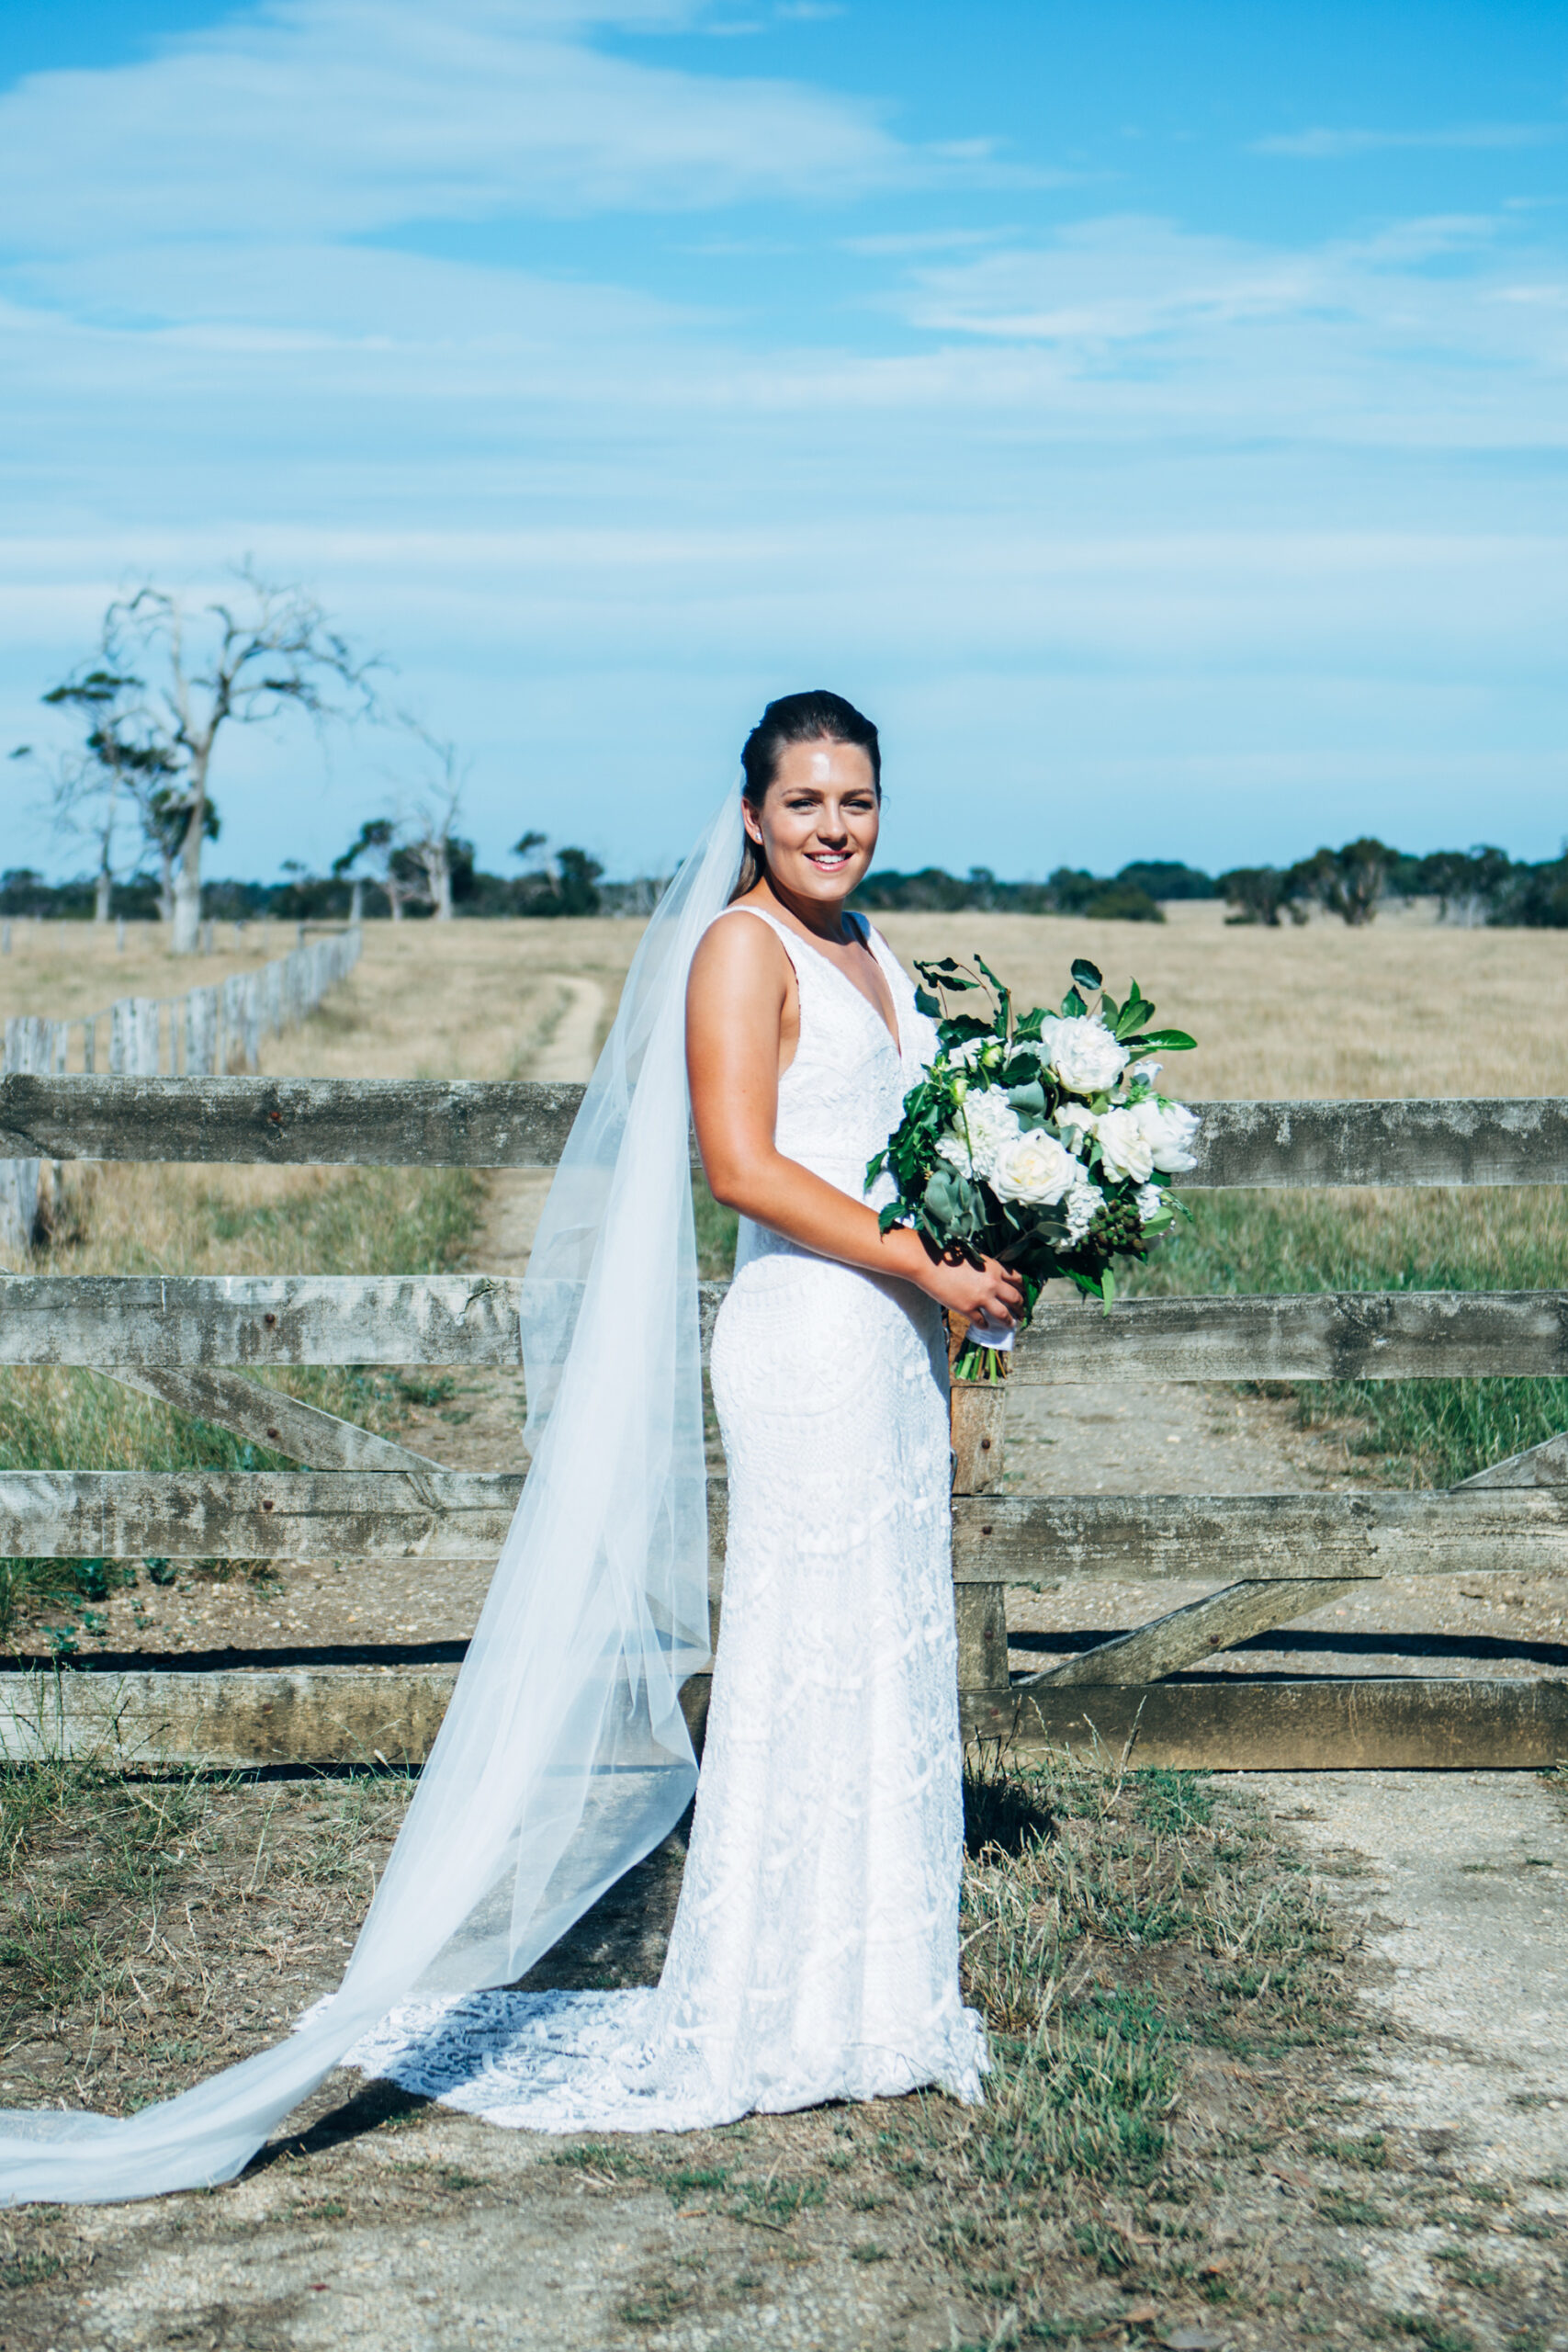 Danielle Seamus Elegant Rustic Wedding Love Other Photography SBS 016 scaled